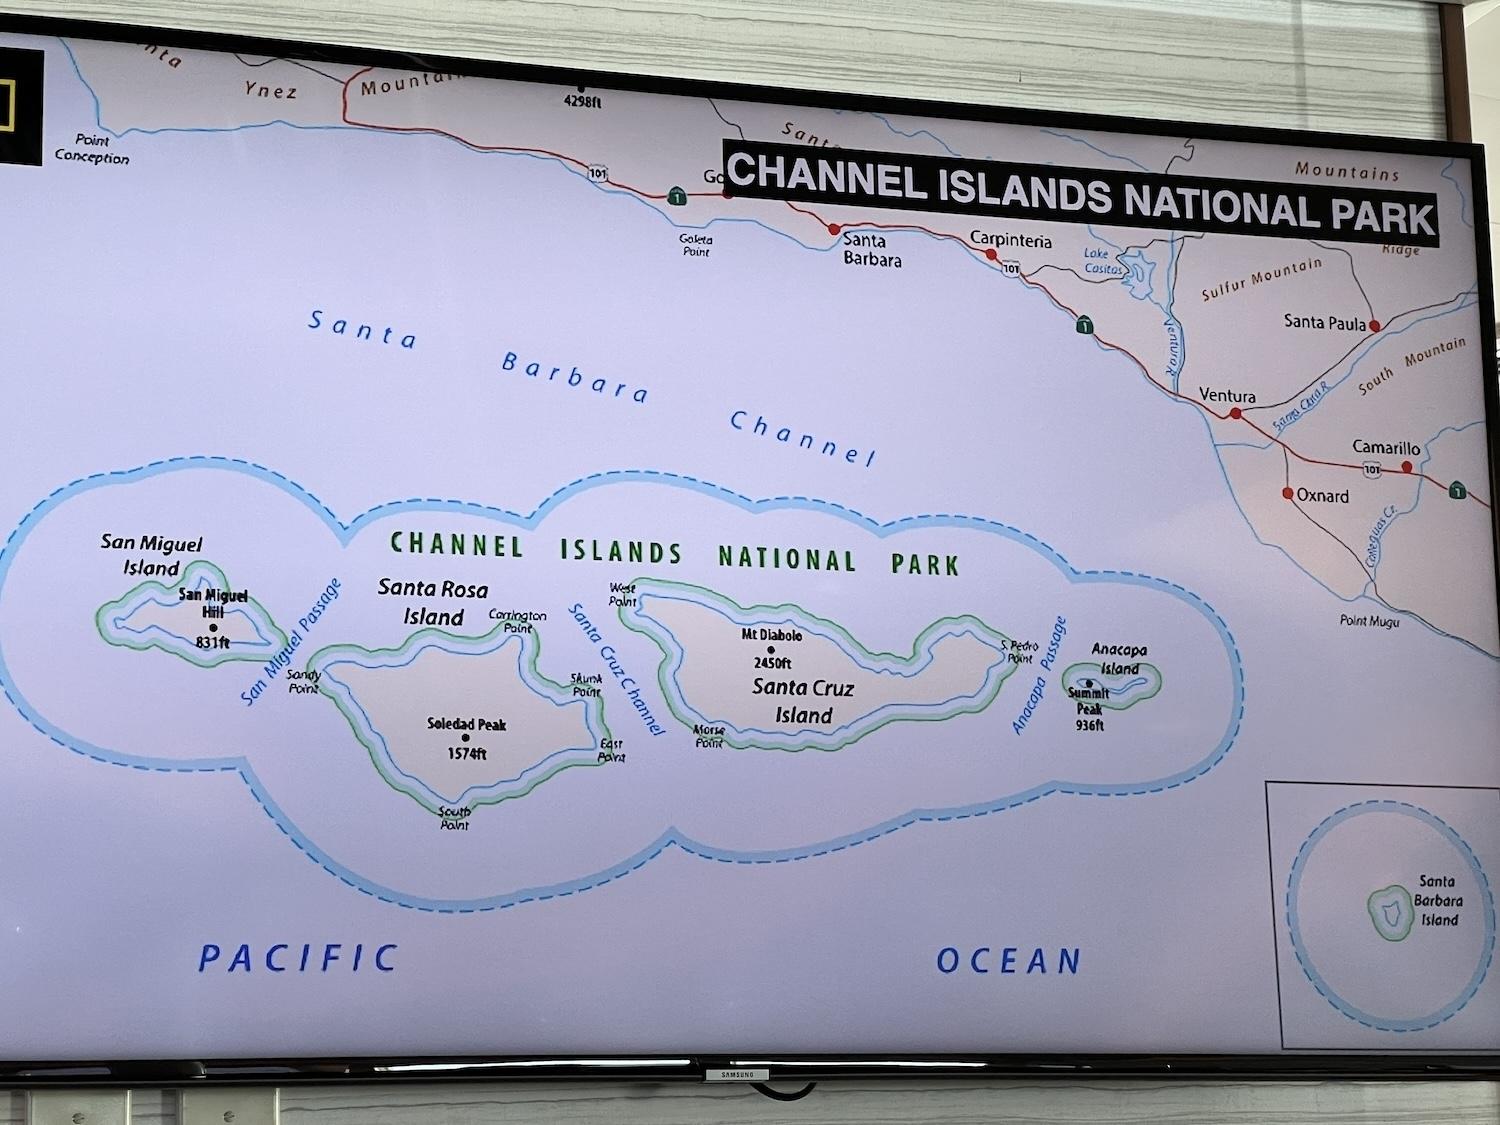 A map of Channel Islands National Park shows the five islands under the National Park Service care, and their proximity to Santa Barbara on the mainland.